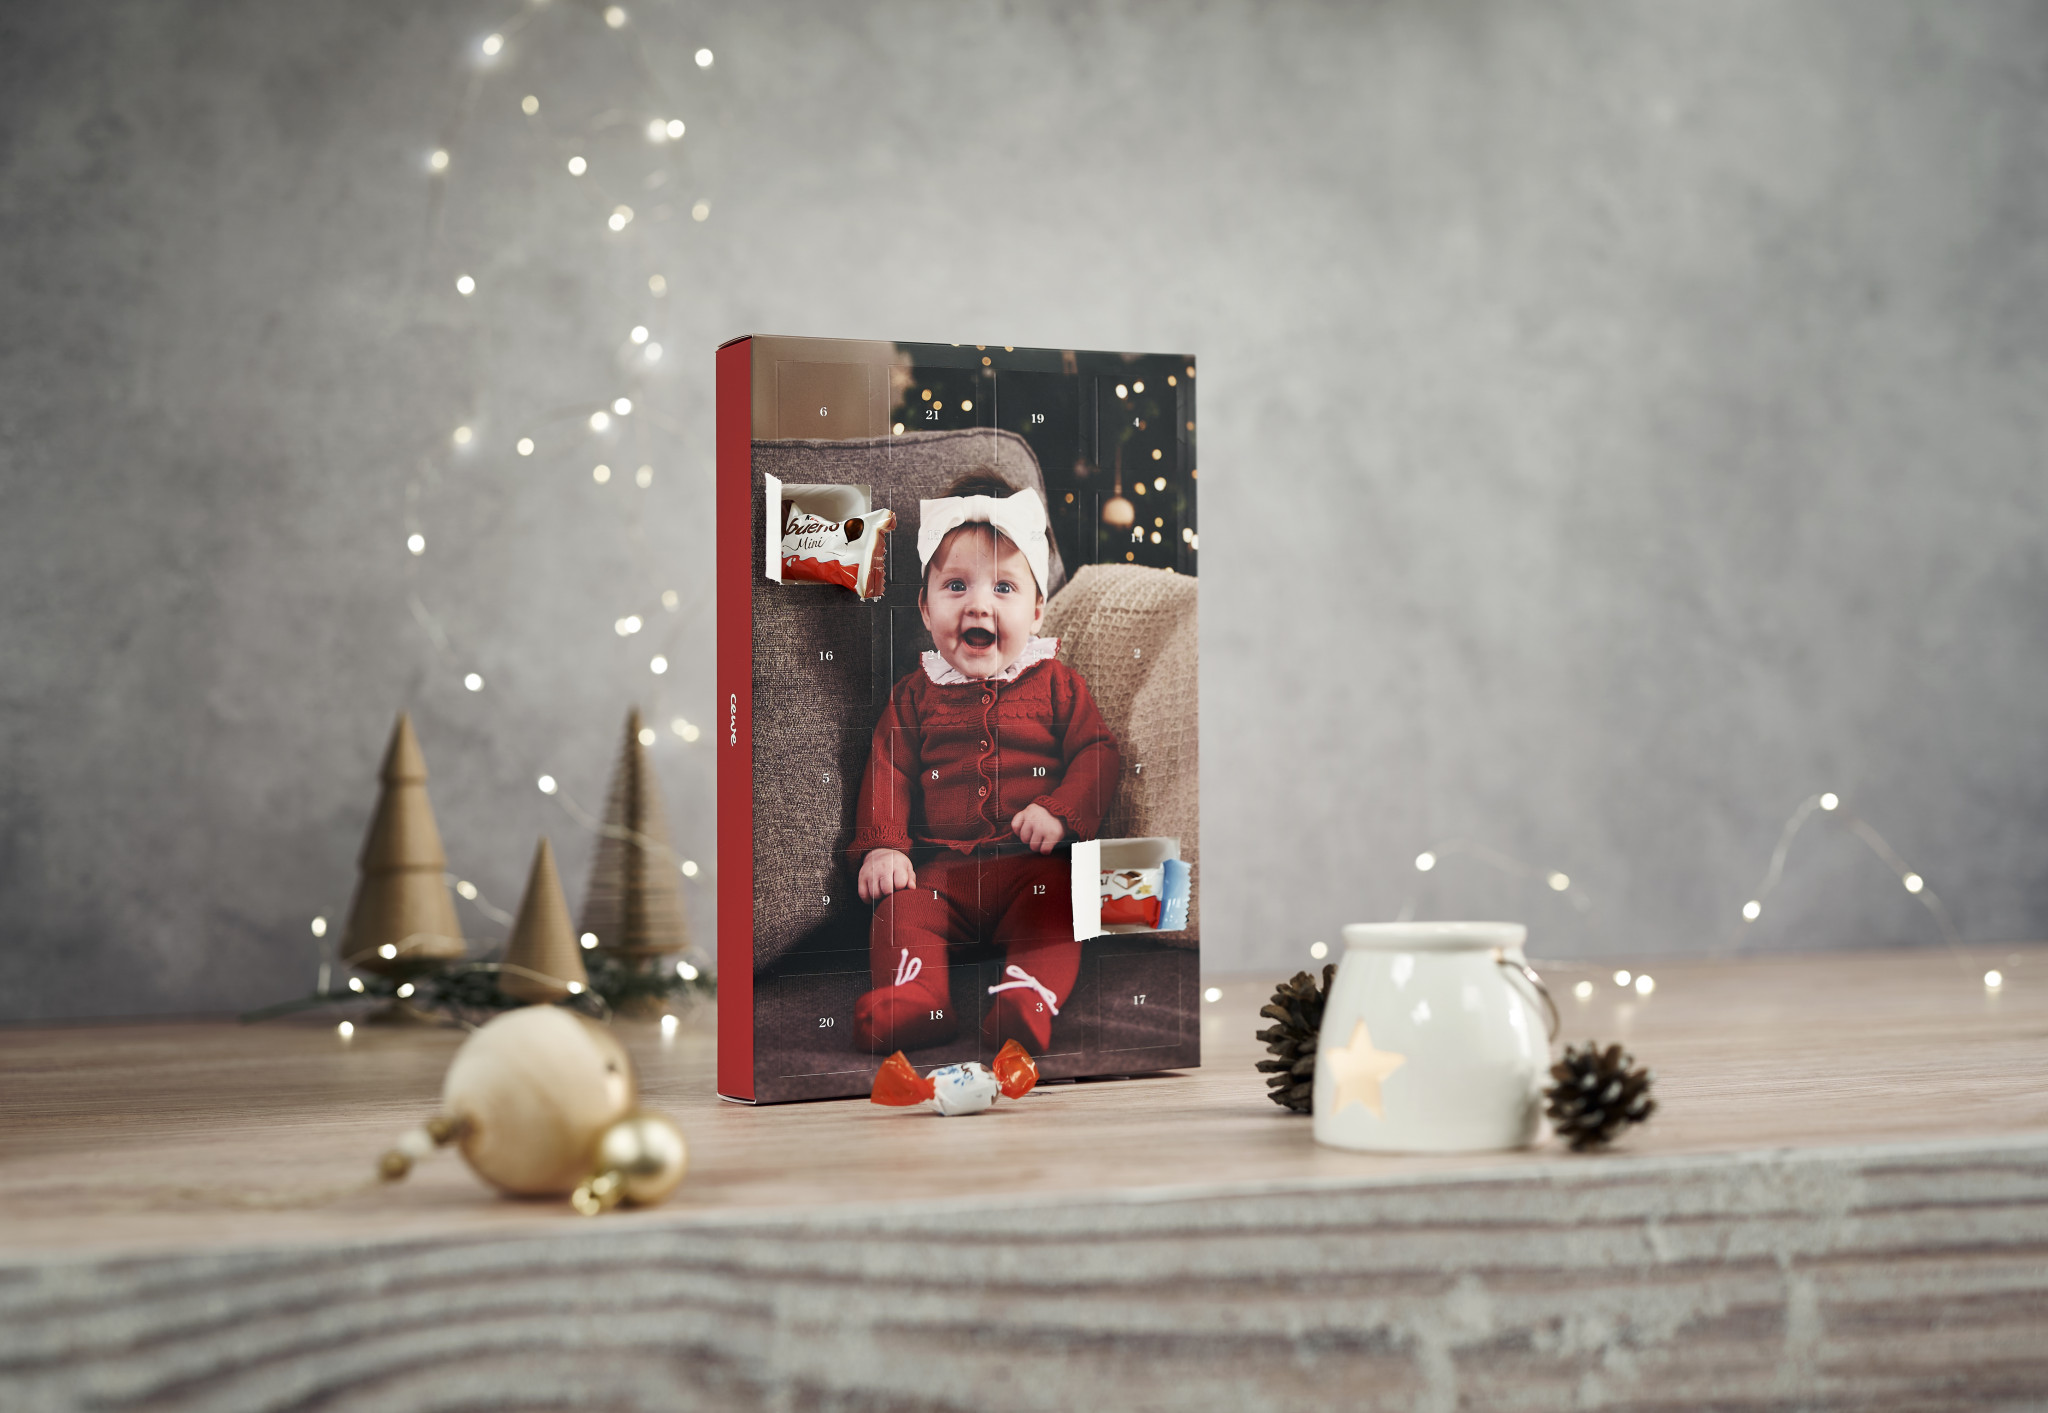 Personalise the countdown to Christmas with CEWE Advent Calendars at